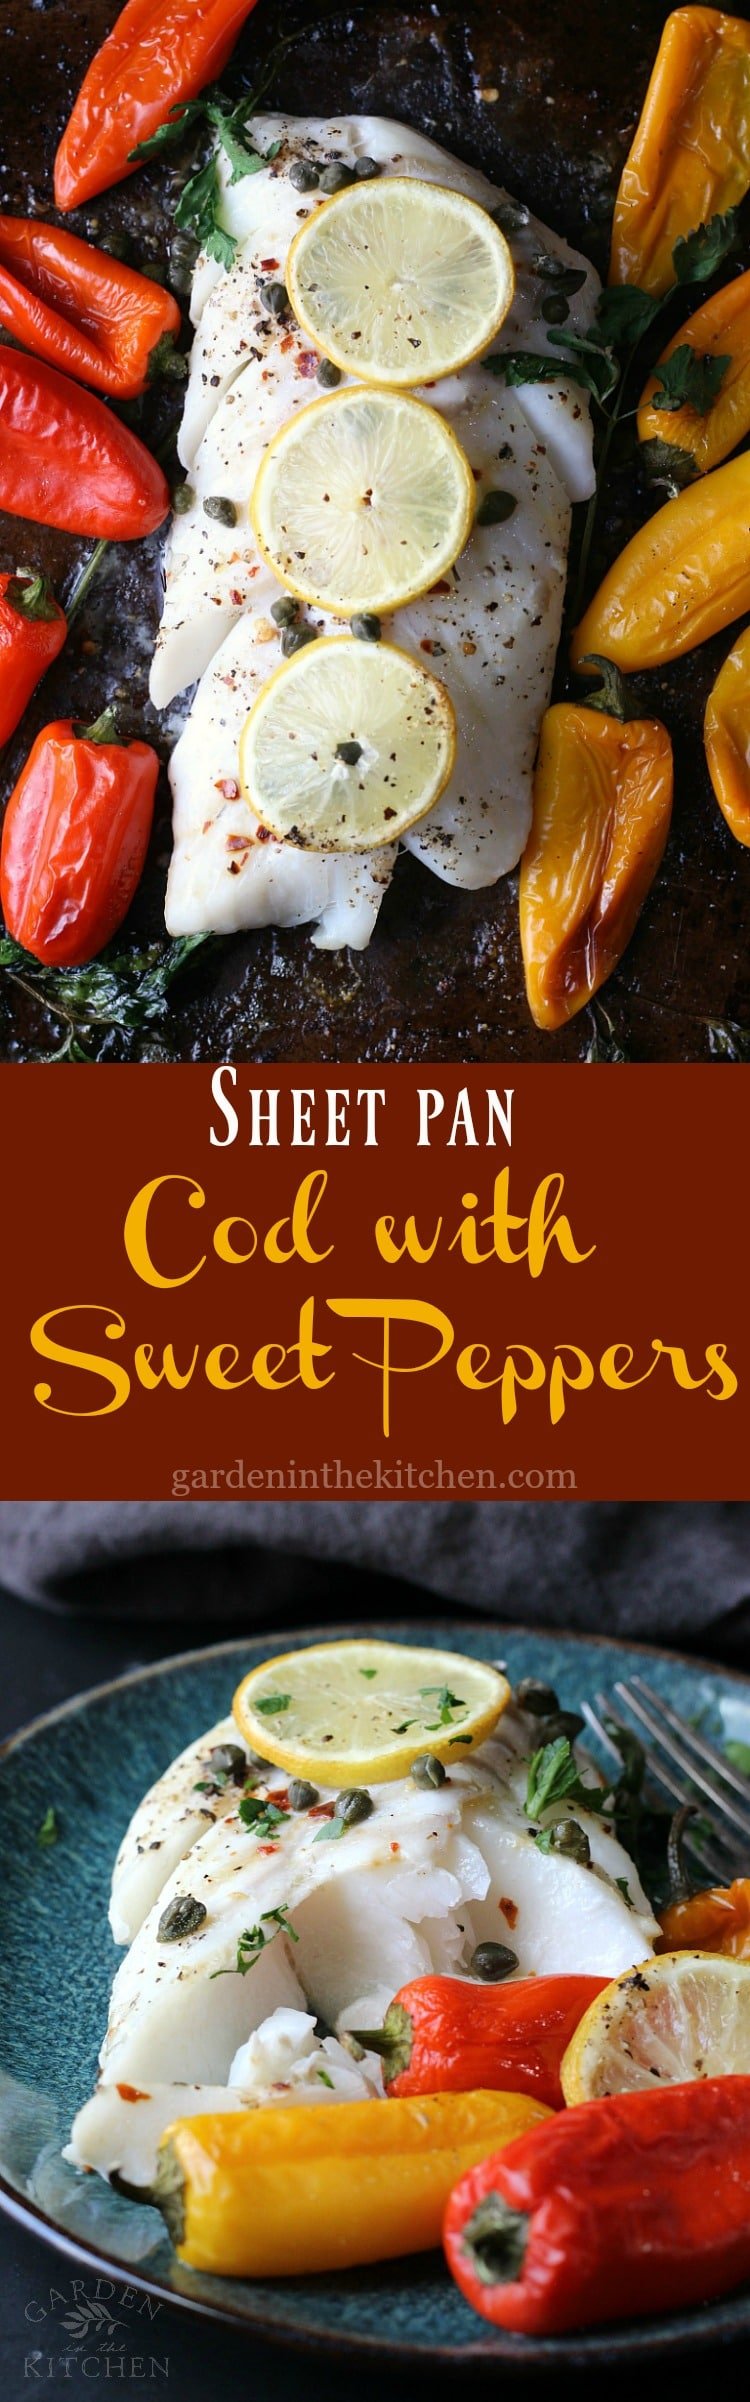 Sheet Pan Cod with Sweet Peppers